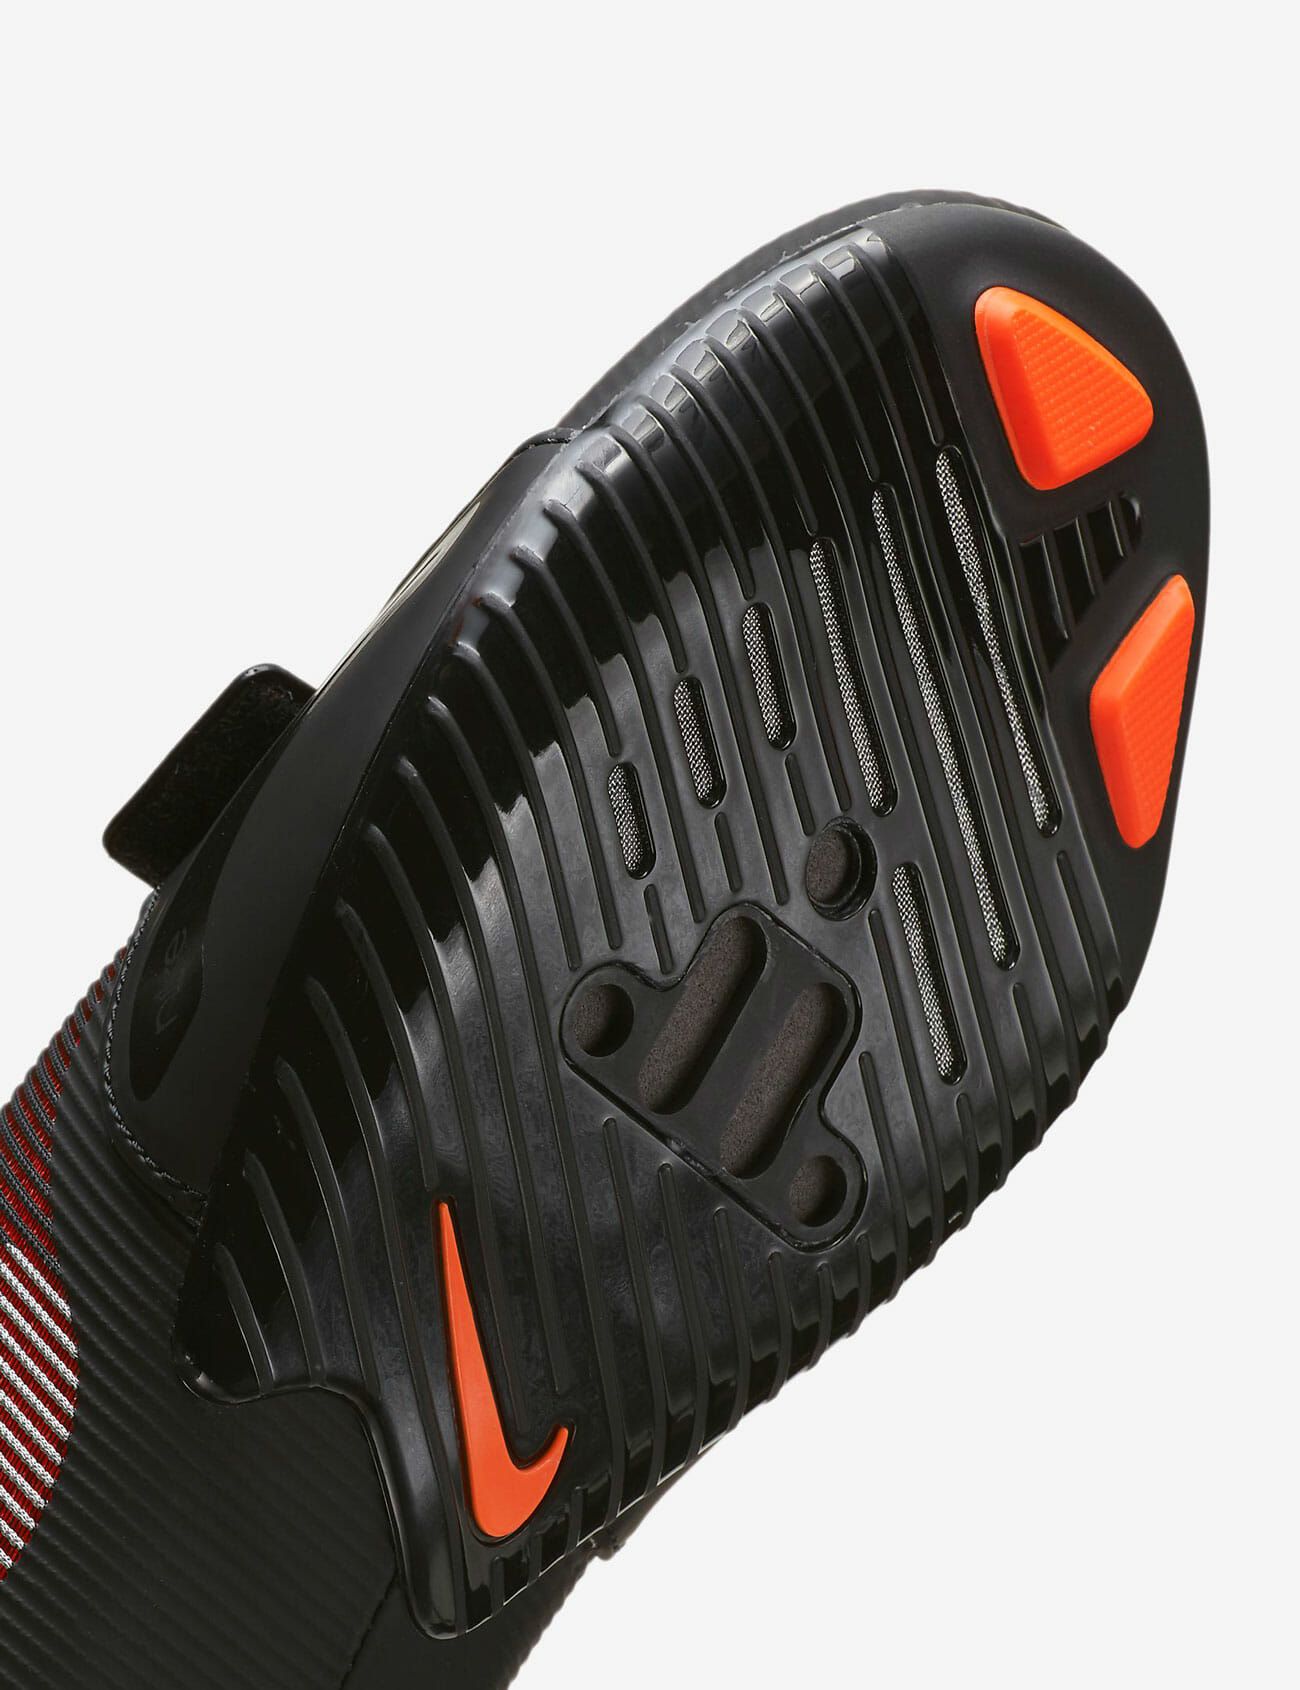 This New Cycling Shoe Is a First for Nike